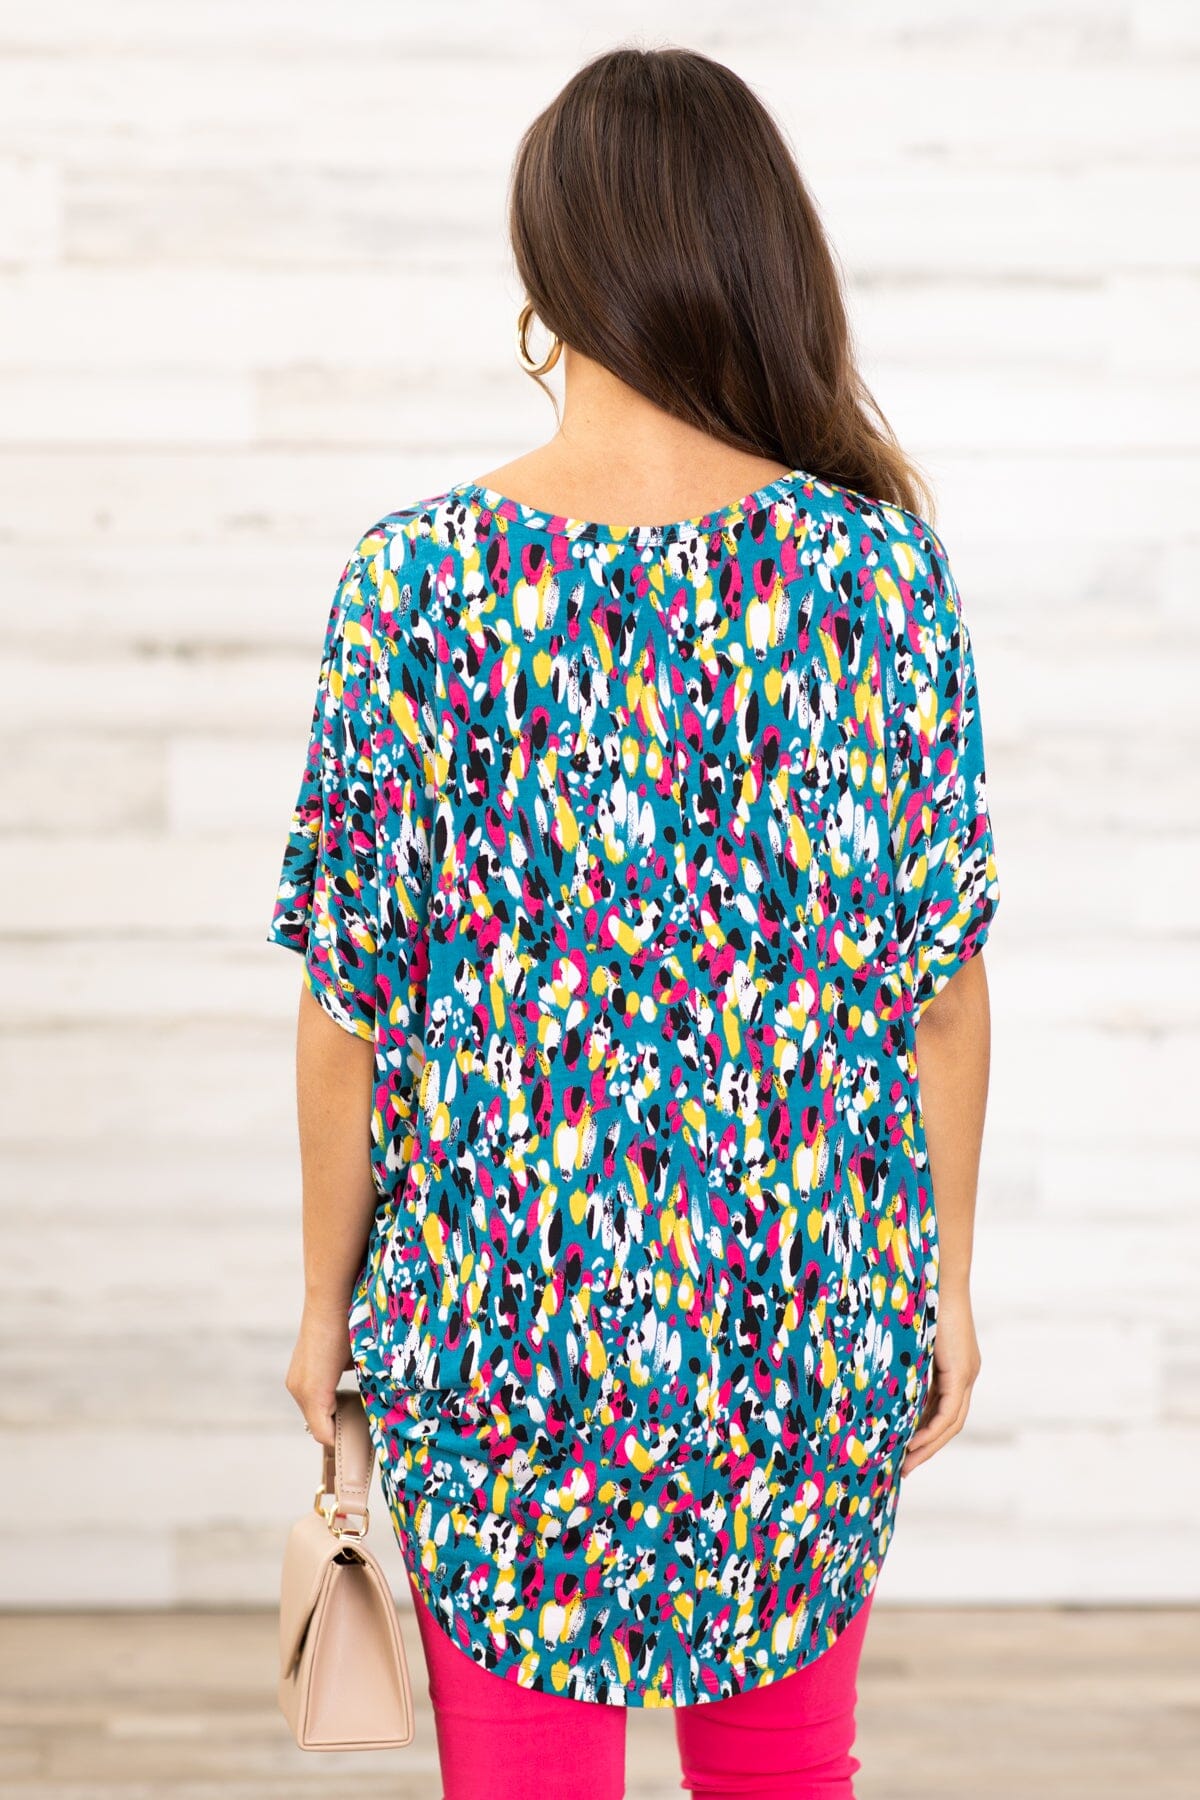 Teal and Yellow Multicolor Abstract Print Top - Filly Flair